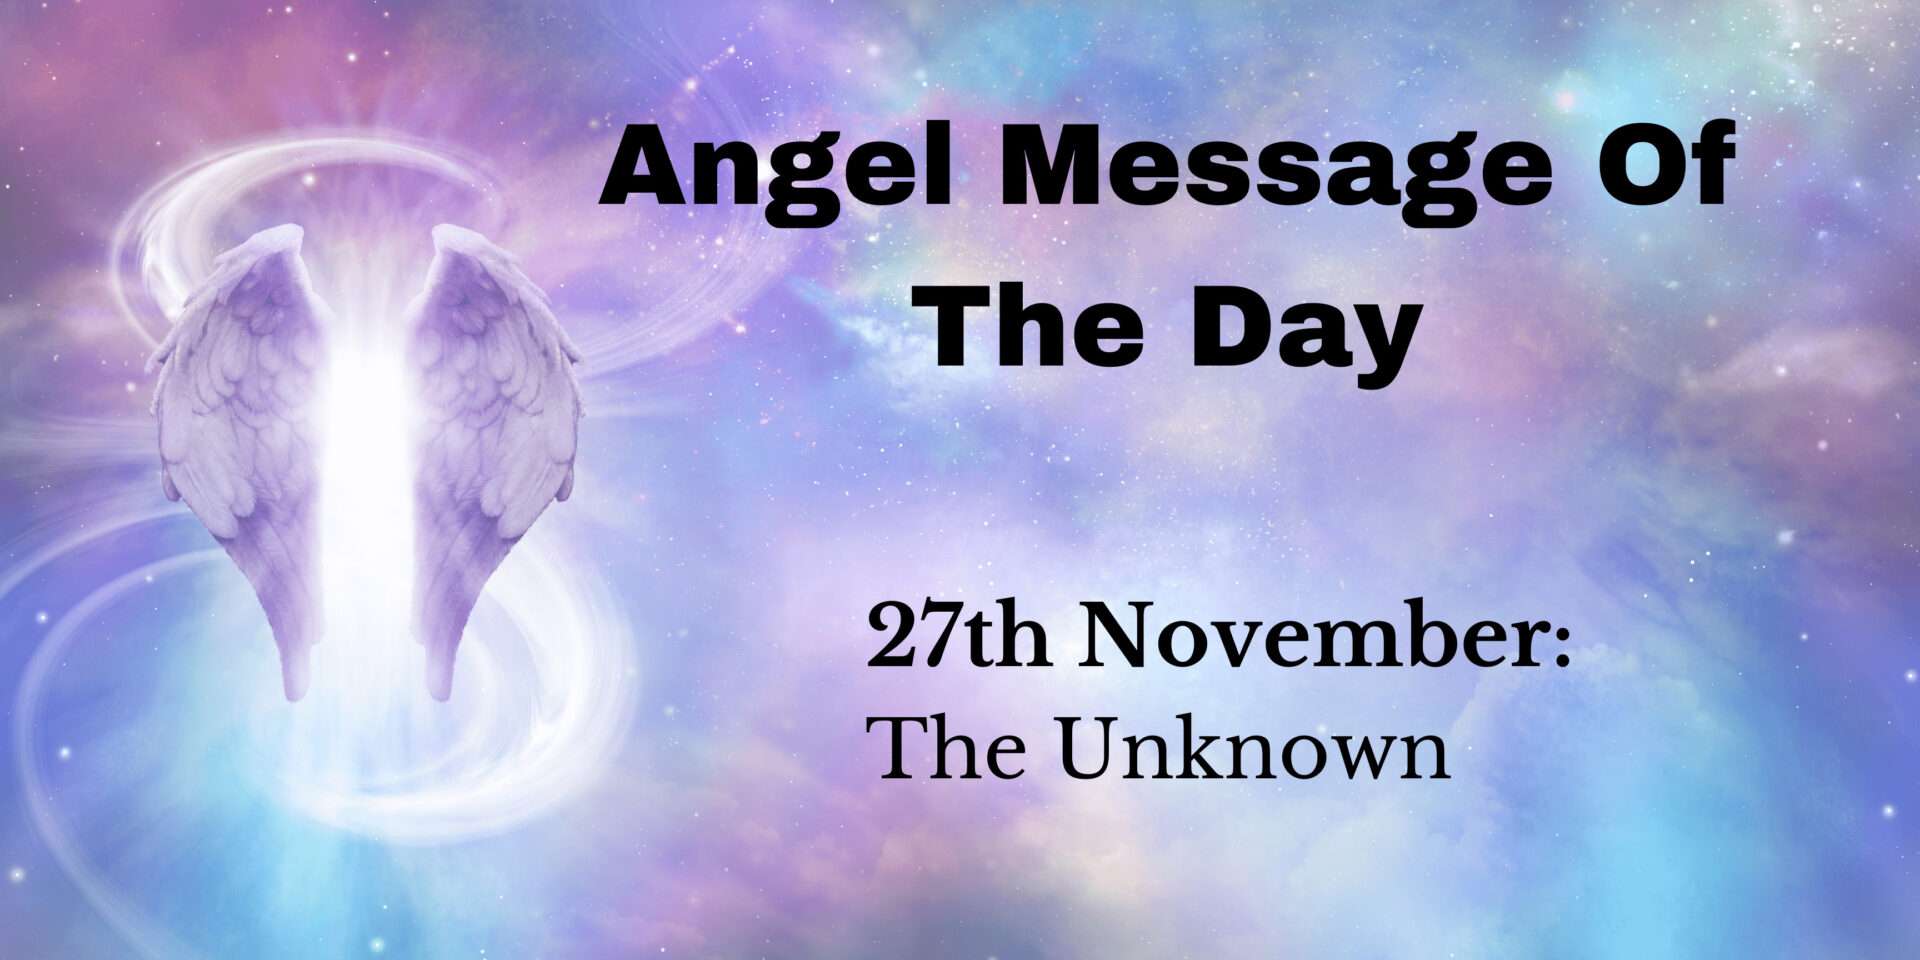 angel message of the day : the unknown